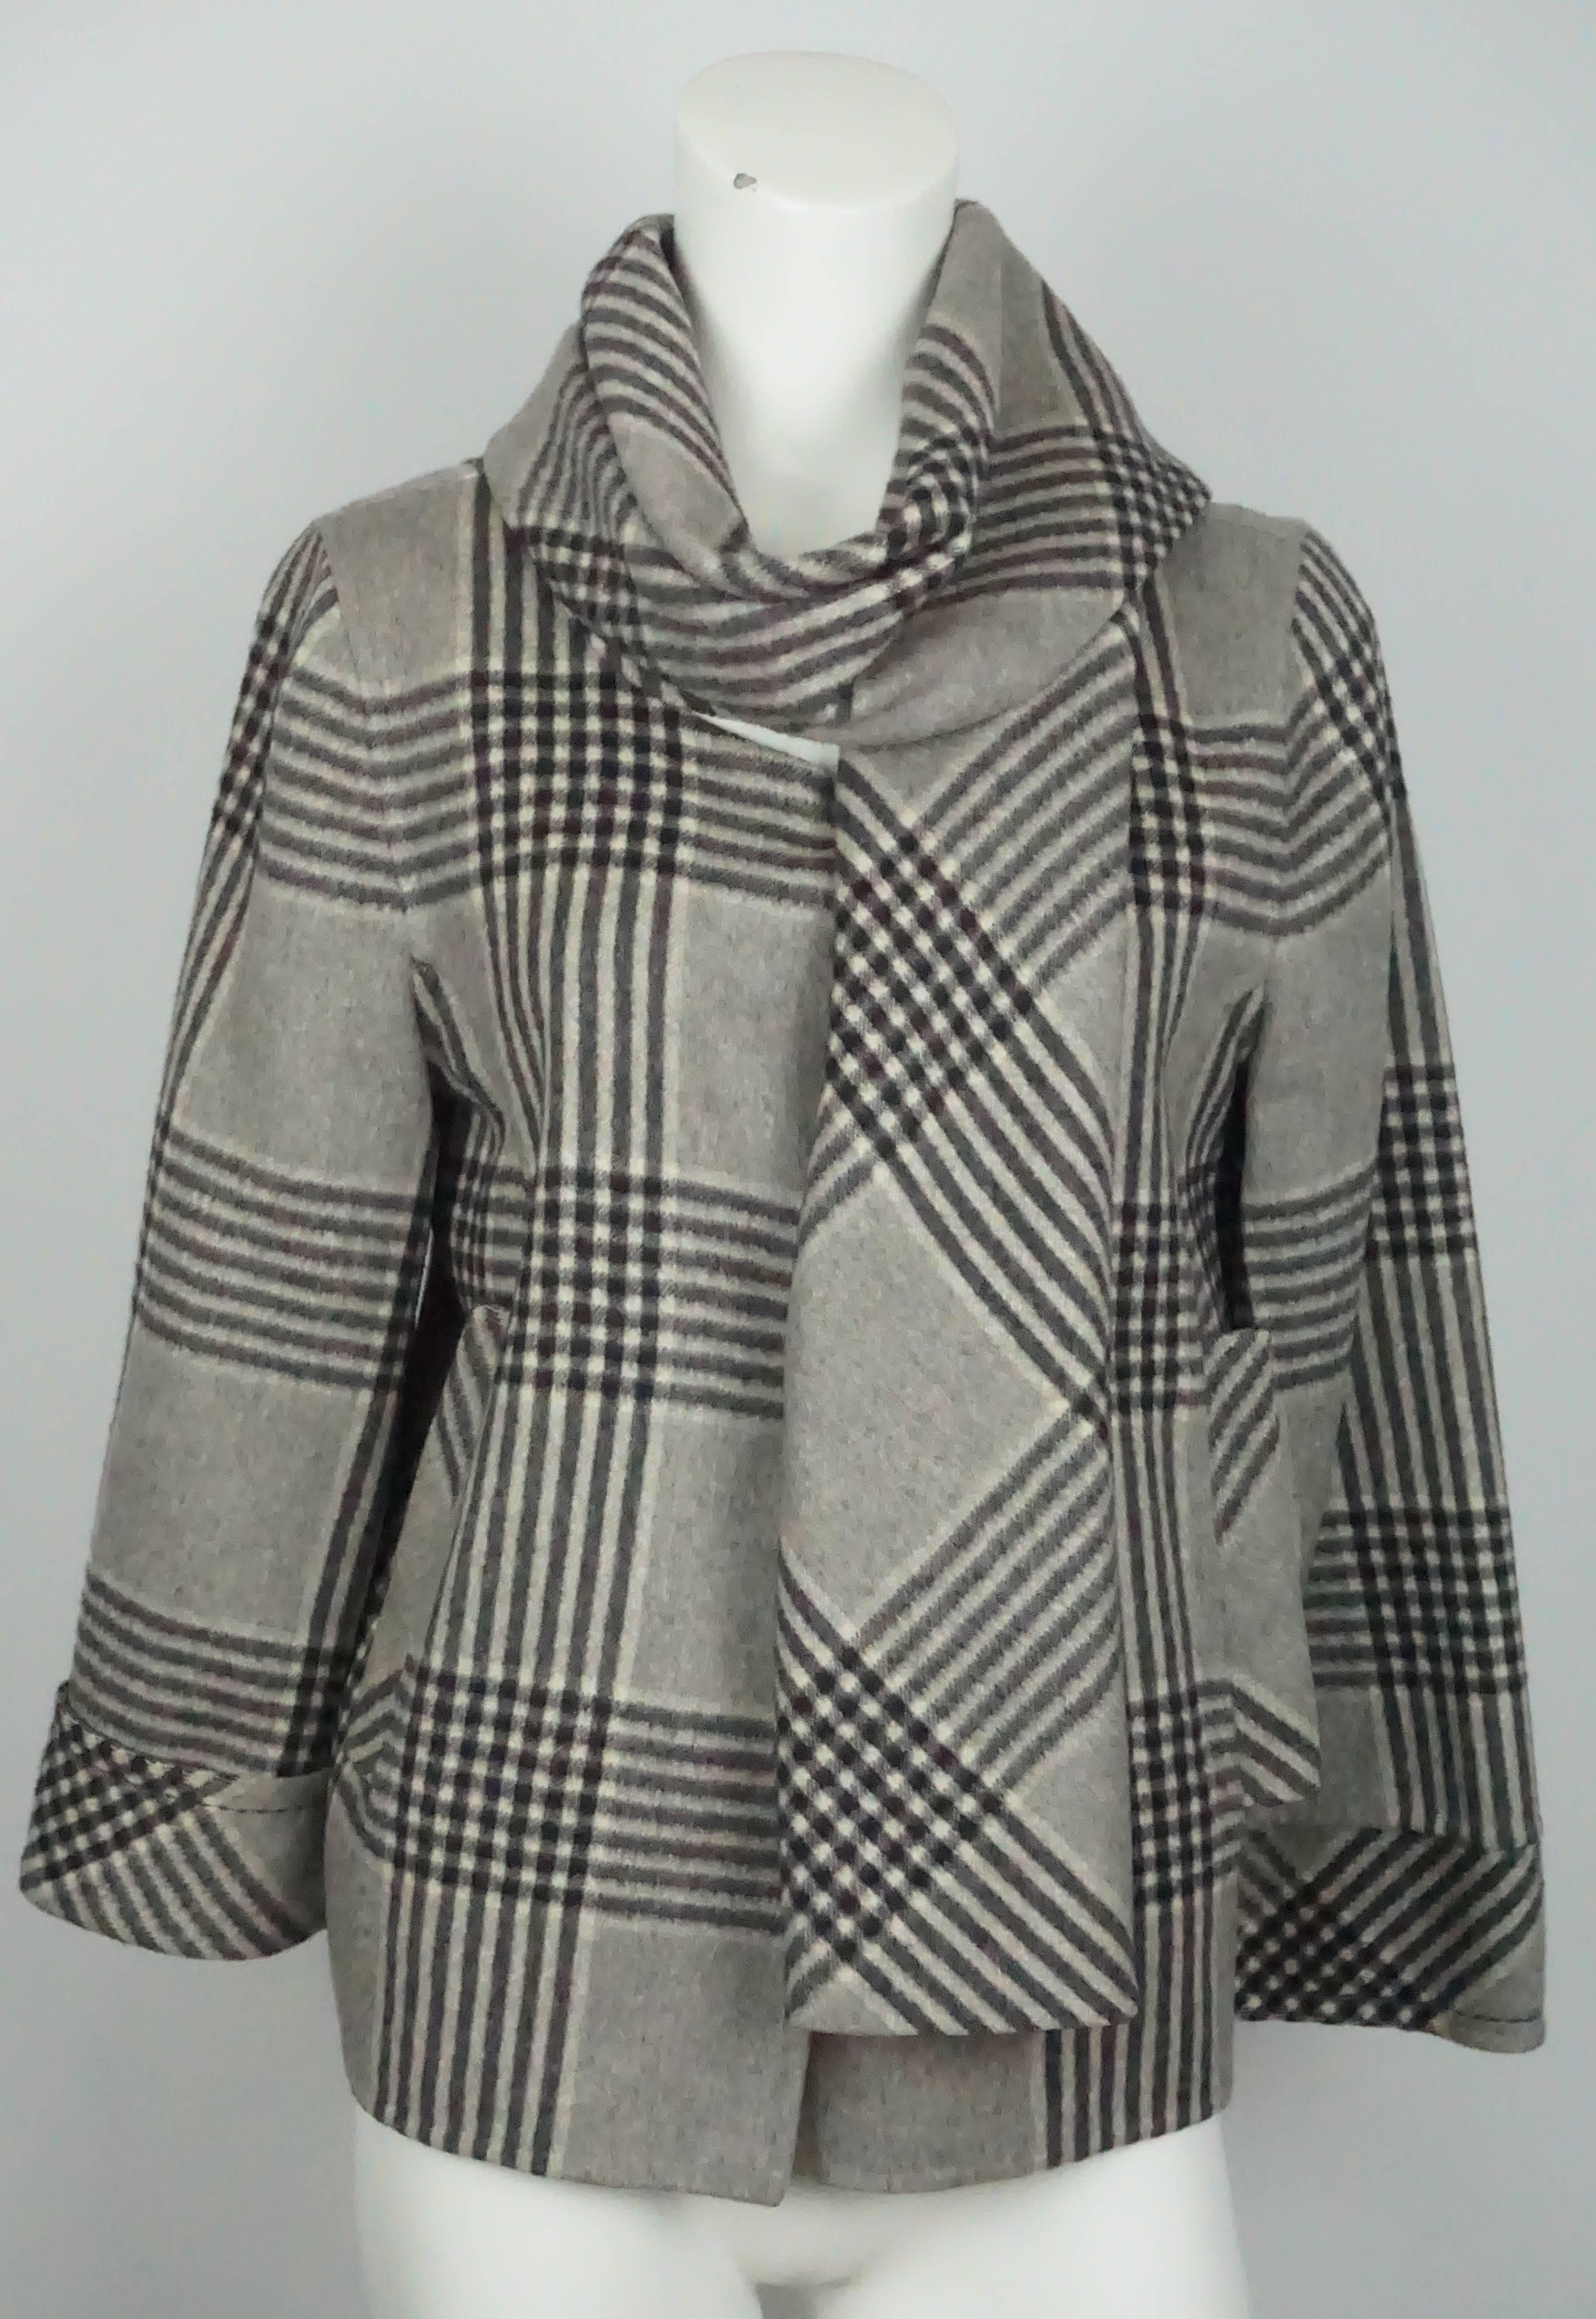 Oscar De La Renta Grey Window Pane Double Face Camel and Persian Wool Jacket - 8    This spectacular jacket is so incredibly chic. It has a window pane print in grey, It has 2 hidden snaps at the neckline and an attached 12' scarf that when worn